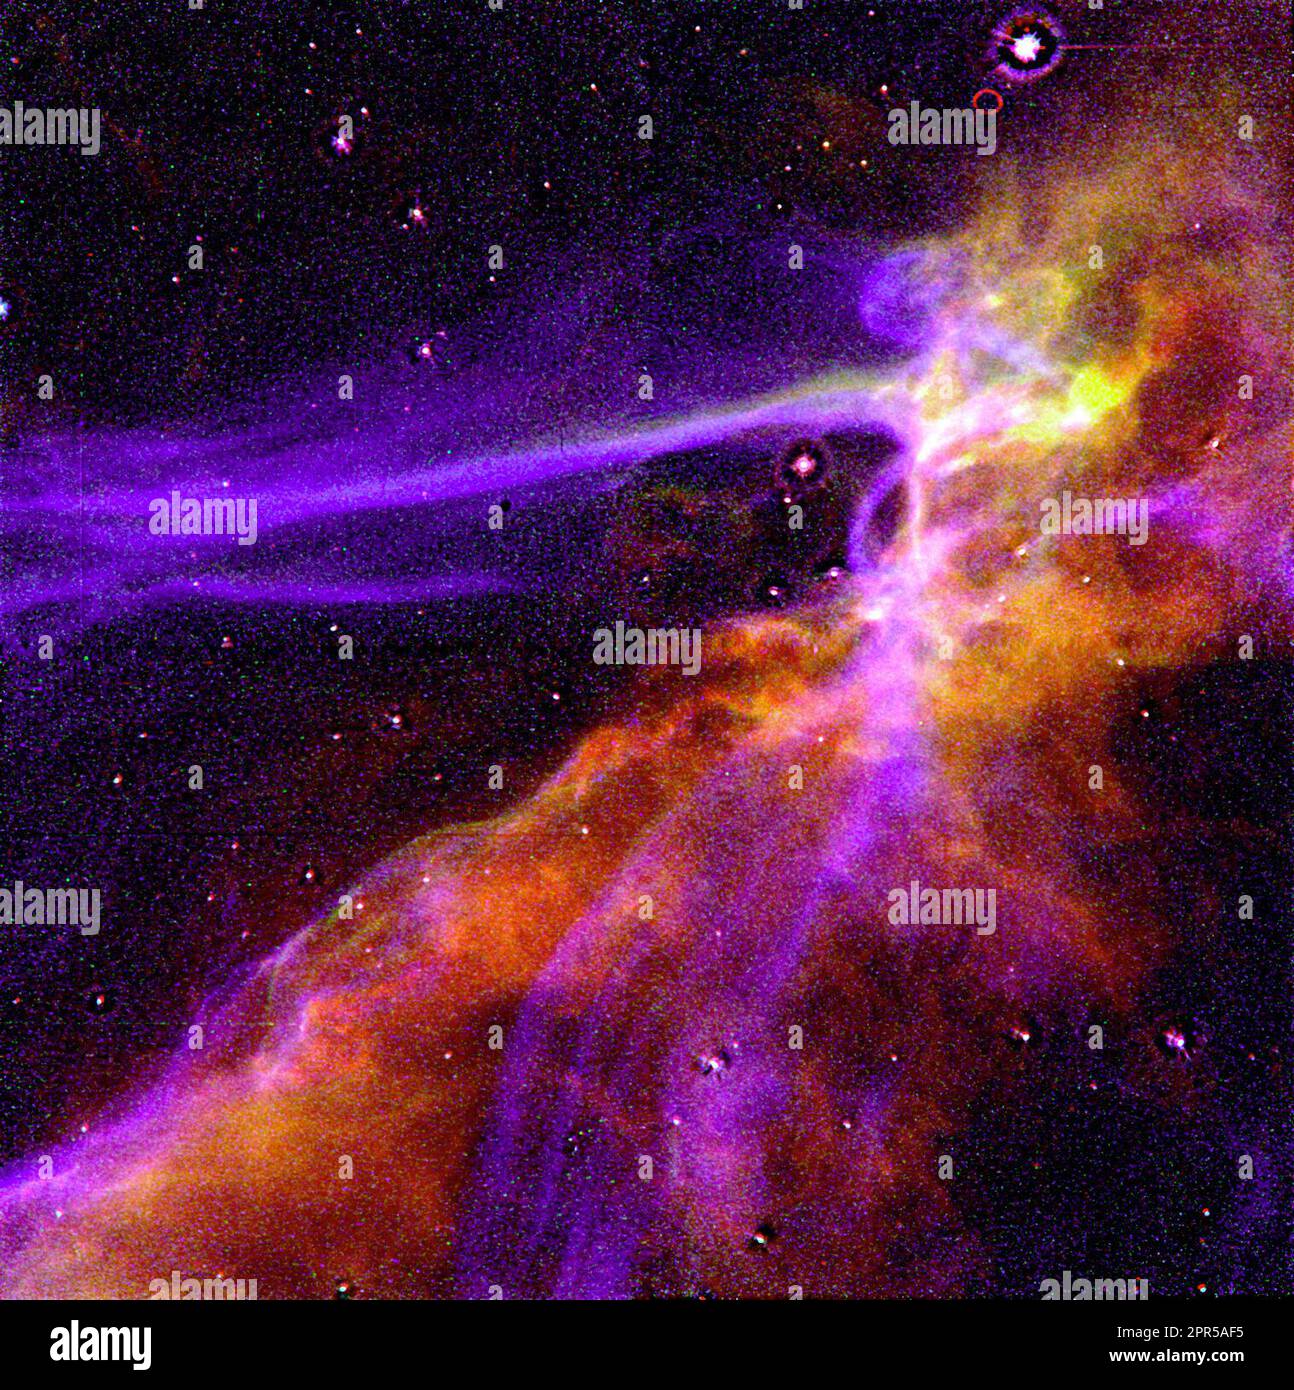 This is an image of a small portion of the Cygnus Loop supernova remnant, which marks the edge of a bubble-like, expanding blast wave from a colossal stellar explosion, occurring about 15,000 years ago. The HST image shows the structure behind the shock waves, allowing astronomers for the first time to directly compare the actual structure of the shock with theoretical model calculations. Besides supernova remnants, these shock models are important in understanding a wide range of astrophysical phenomena, from winds in newly-formed stars to cataclysmic stellar outbursts. The supernova blast is Stock Photo